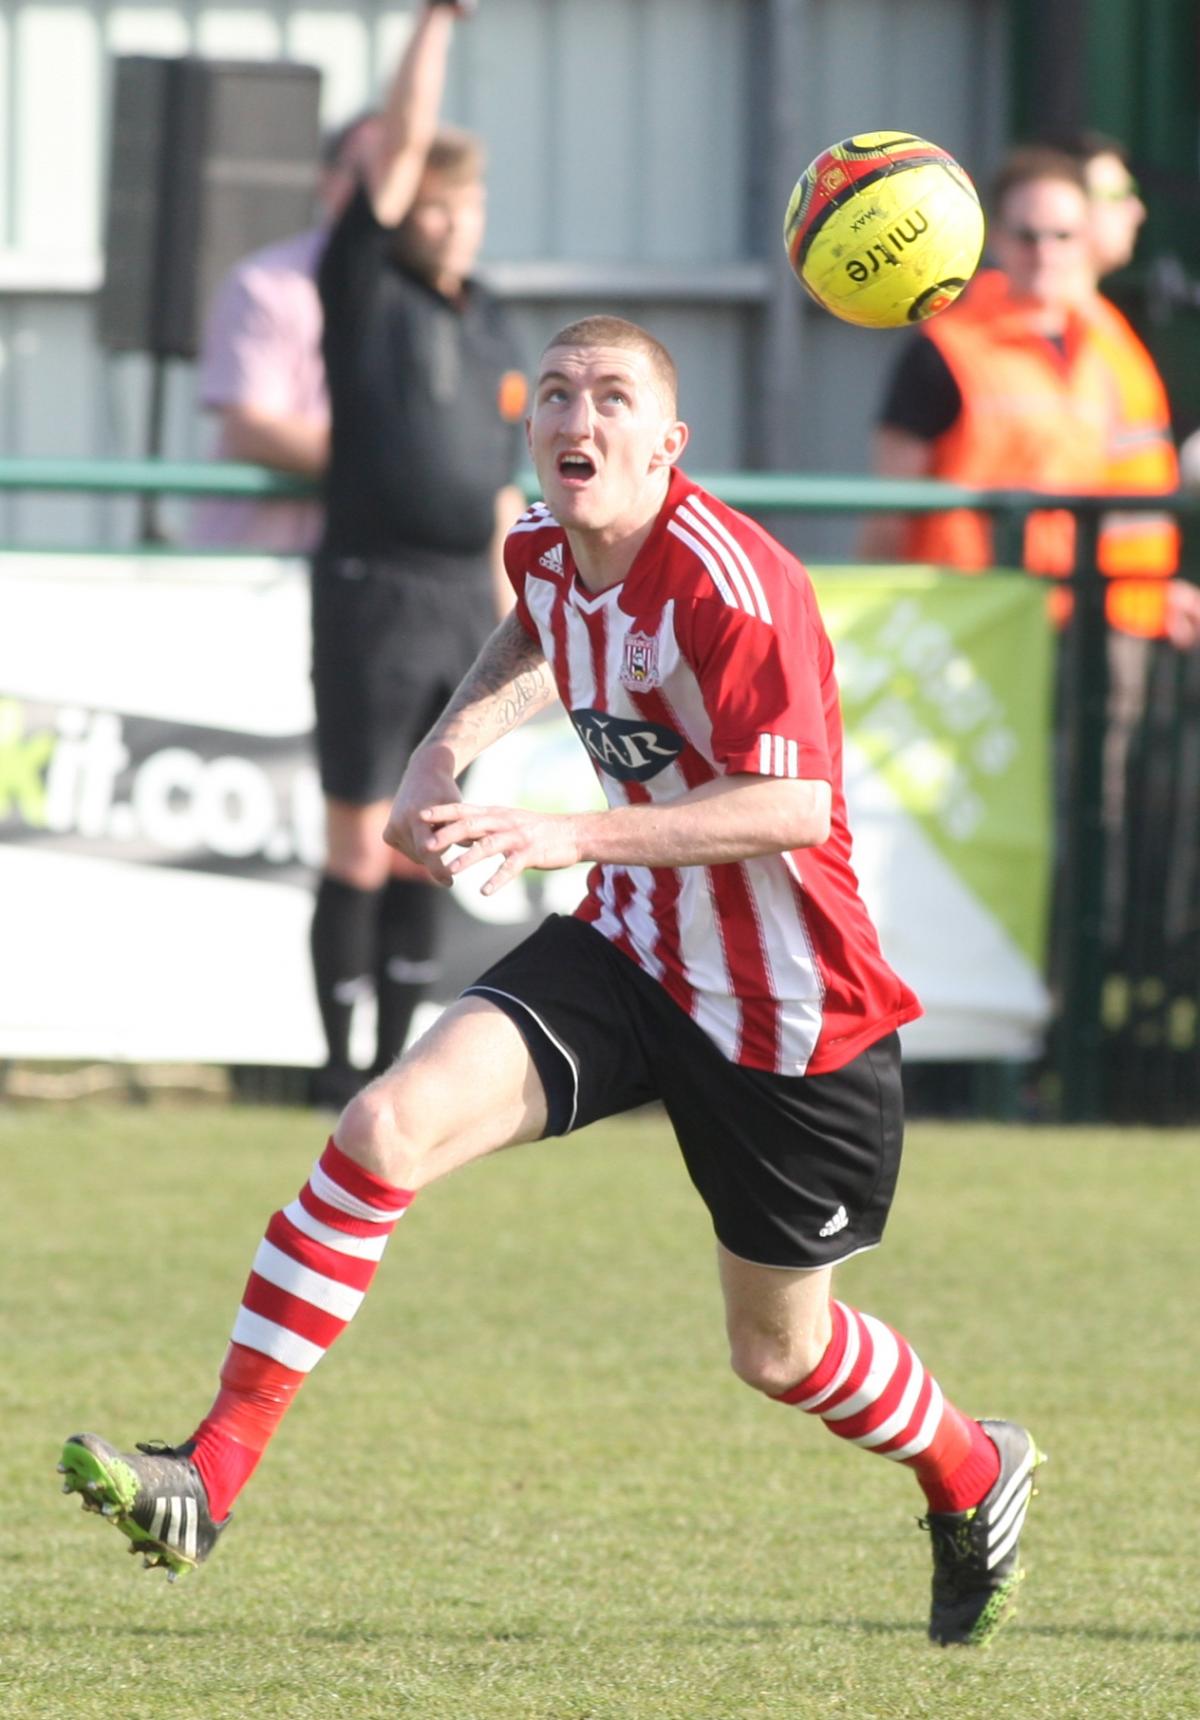 Sholing v Eastbourne in the first leg of the FA Vase semi-final